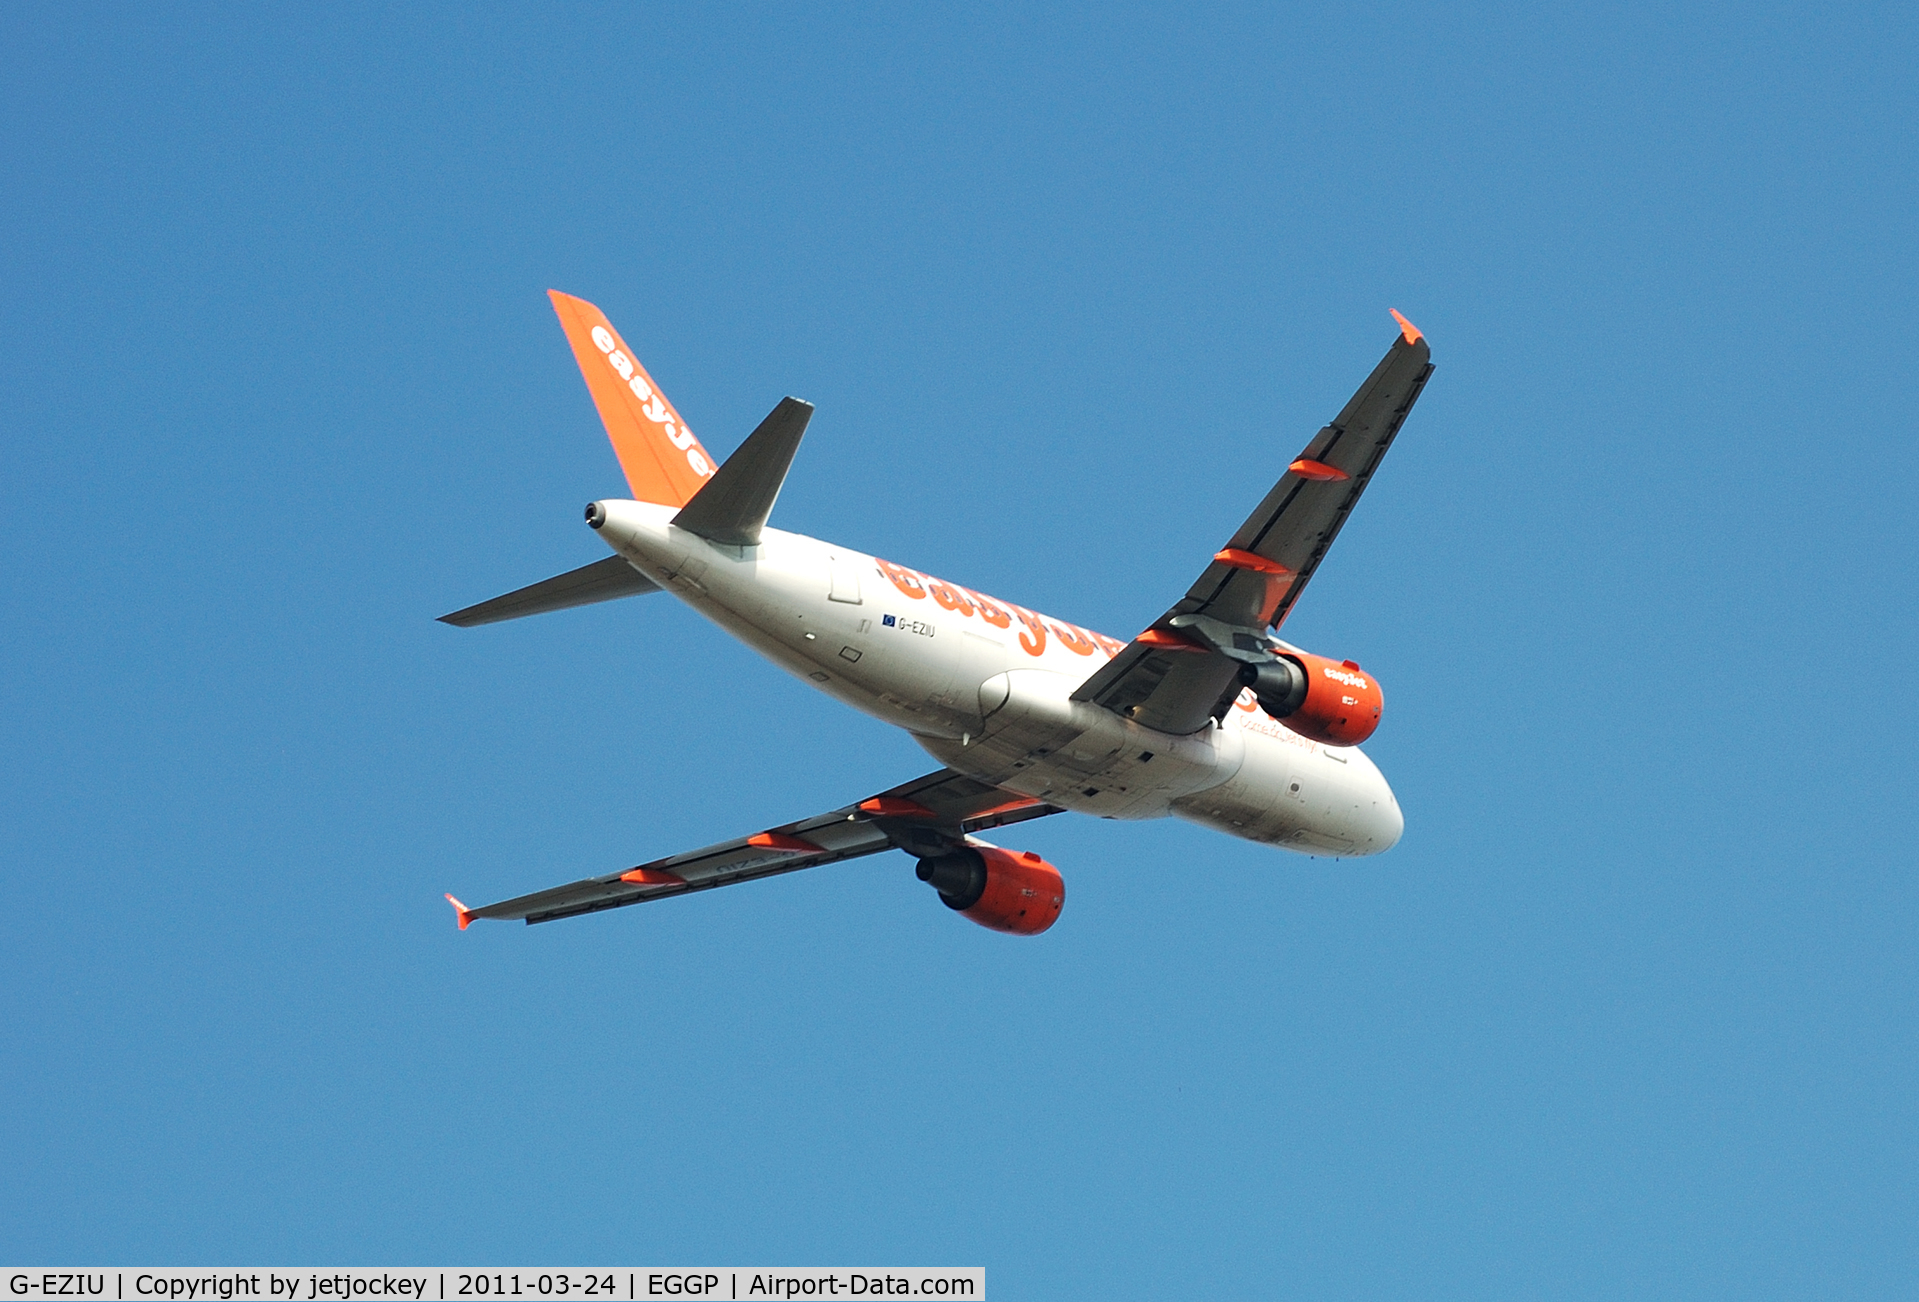 G-EZIU, 2005 Airbus A319-111 C/N 2548, Banking after departure from Liverpool John Lennon